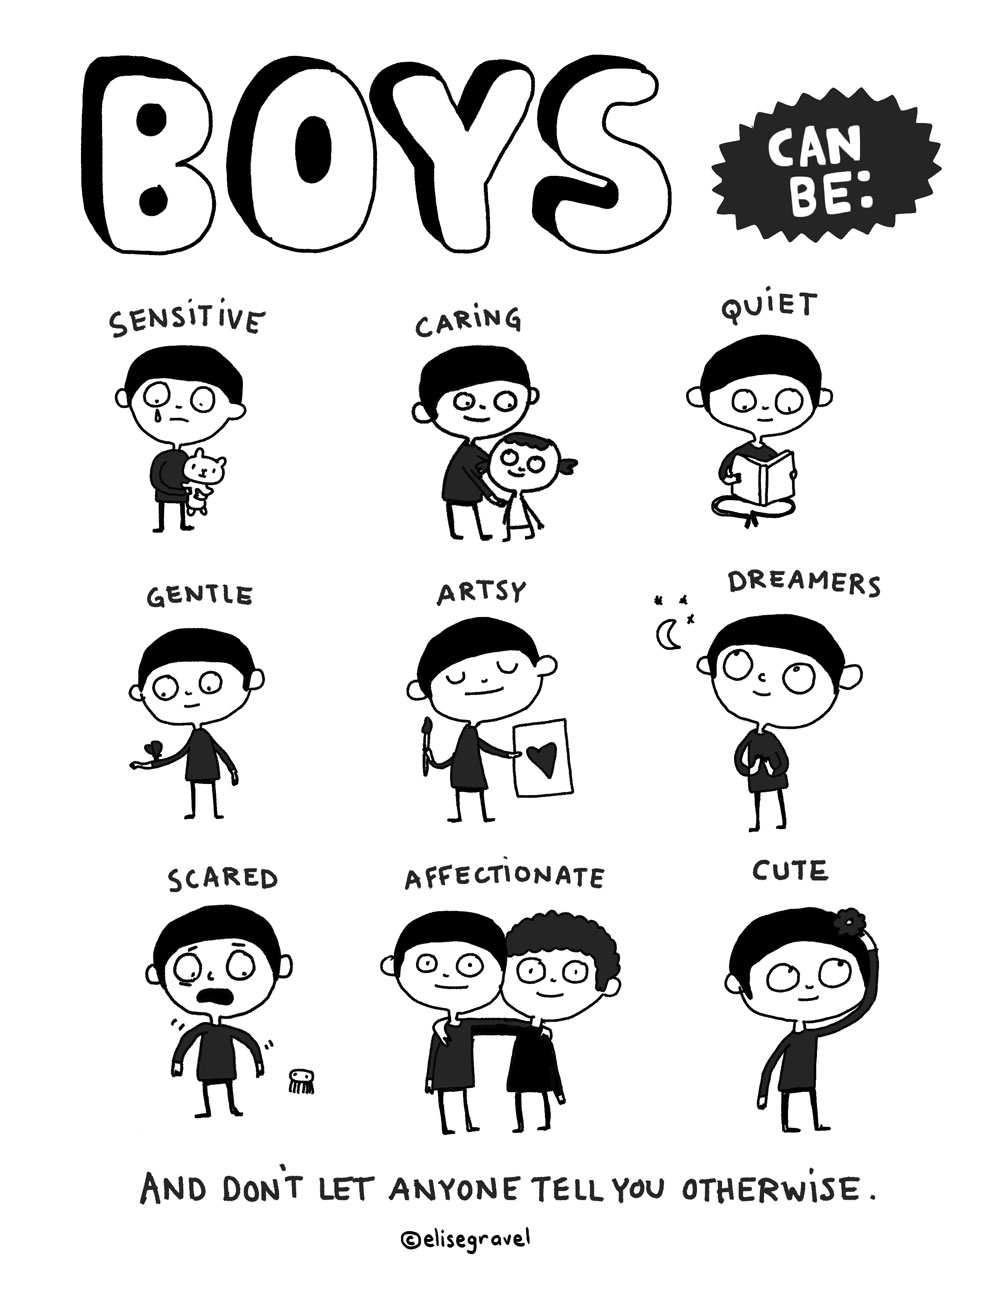 Elise Gravel 'Boys Can Be' Poster